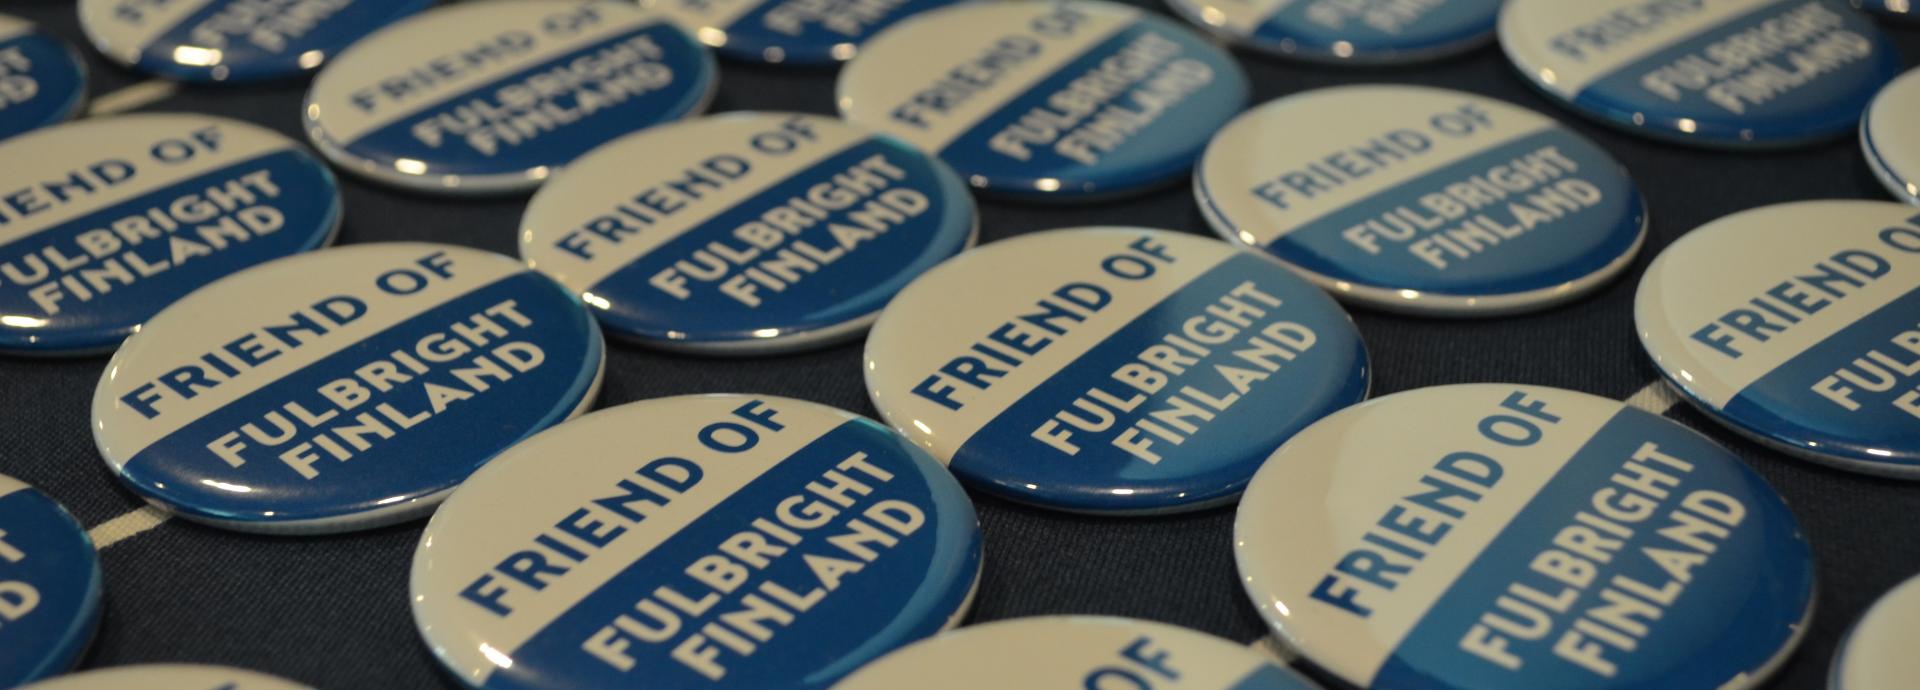 Friends of Fulbright Finland pins